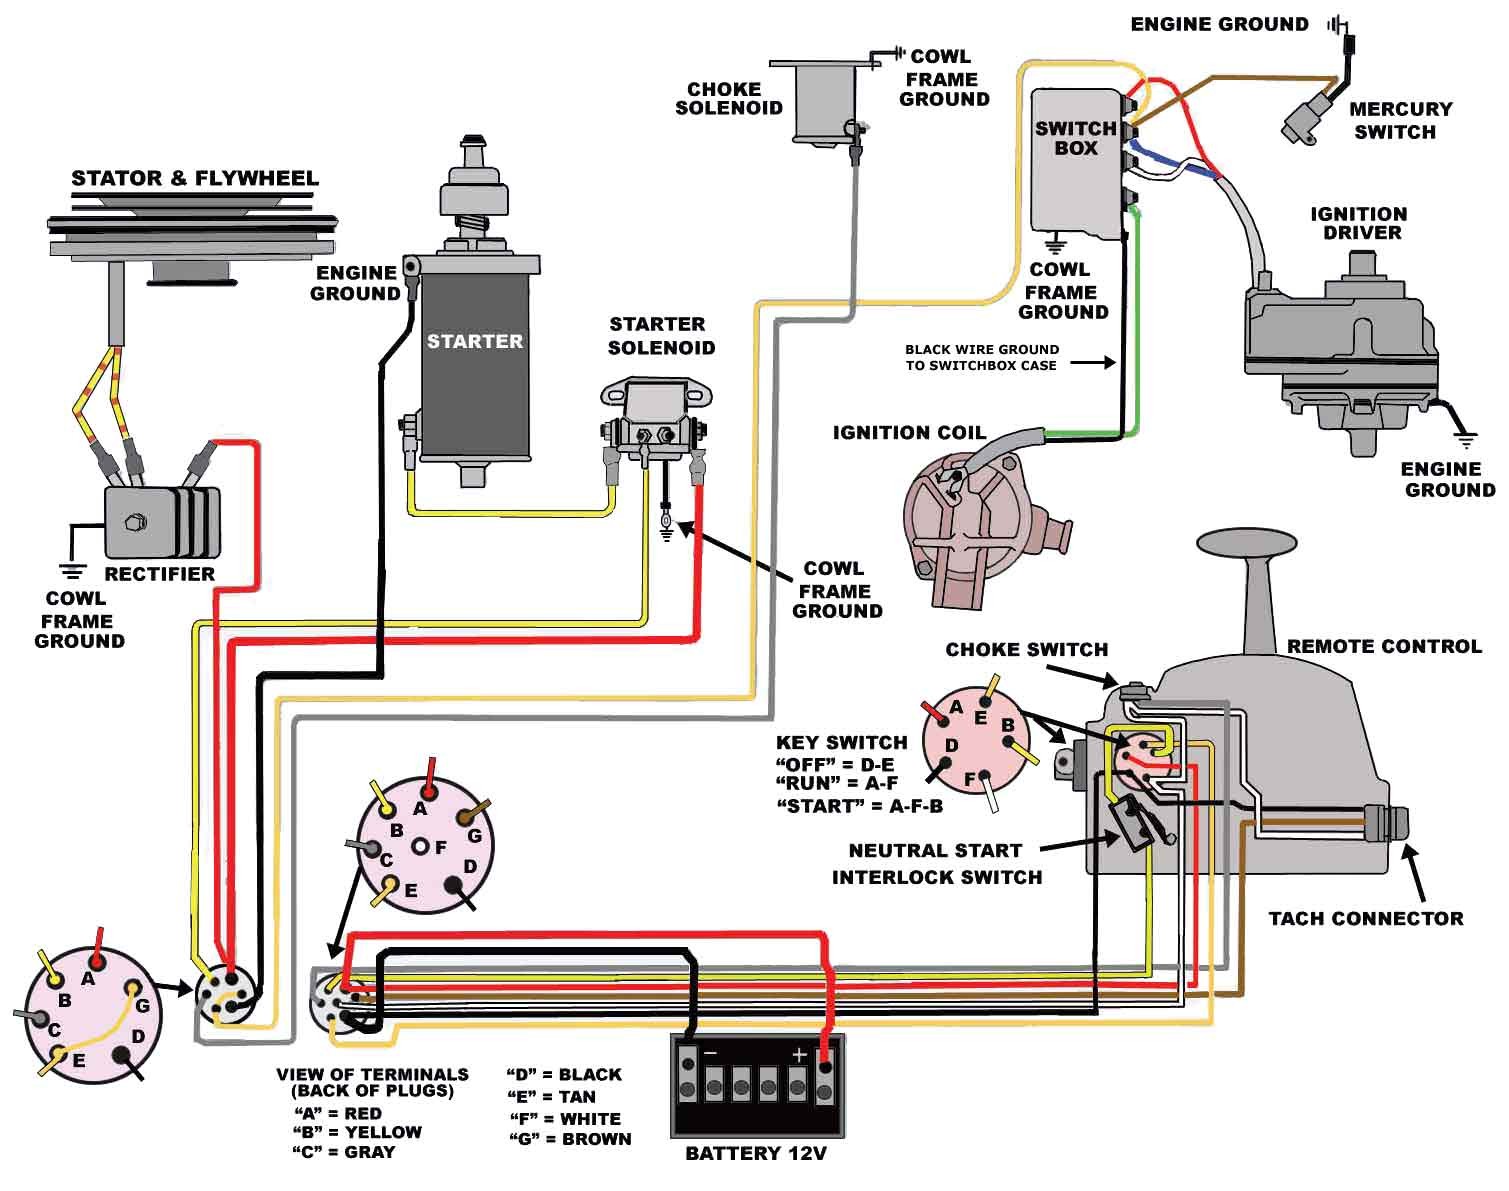 Yamaha Outboard Wiring Harness Diagram from mainetreasurechest.com